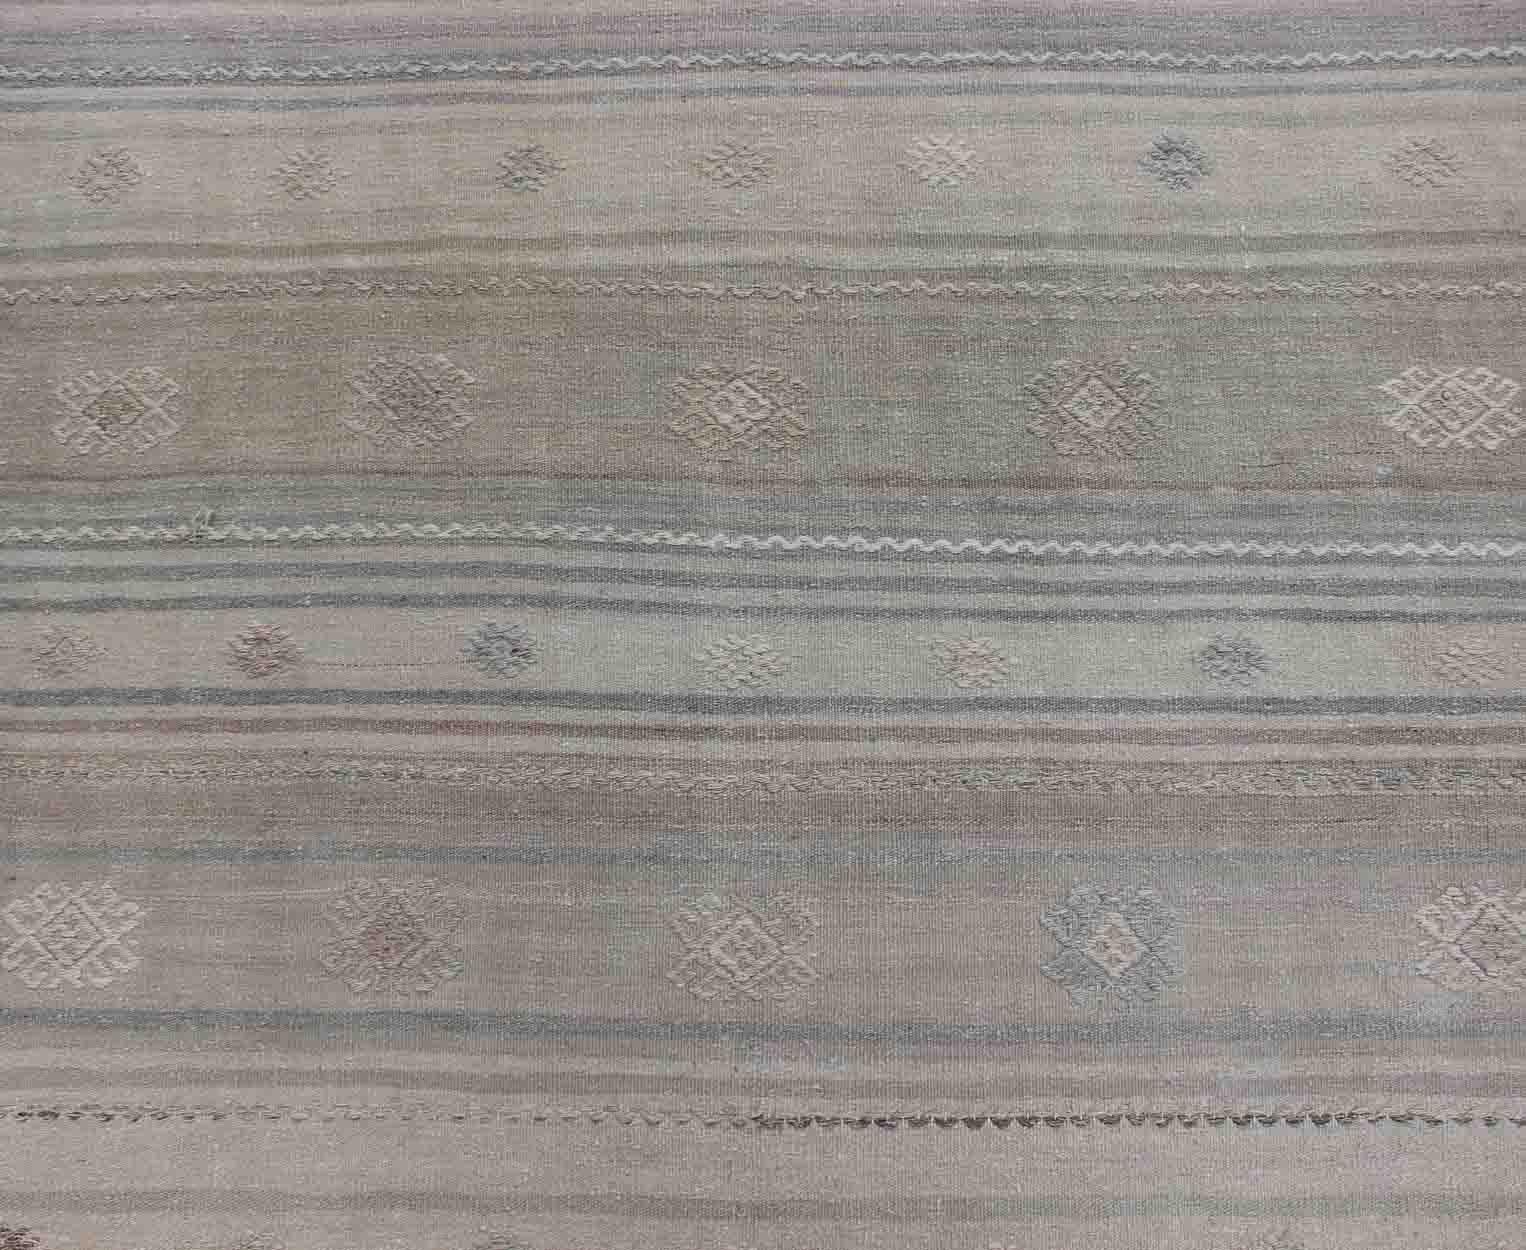 Vintage Hand Woven Turkish Kilim Runner With Stripes in Gray and Natural Tones In Good Condition For Sale In Atlanta, GA